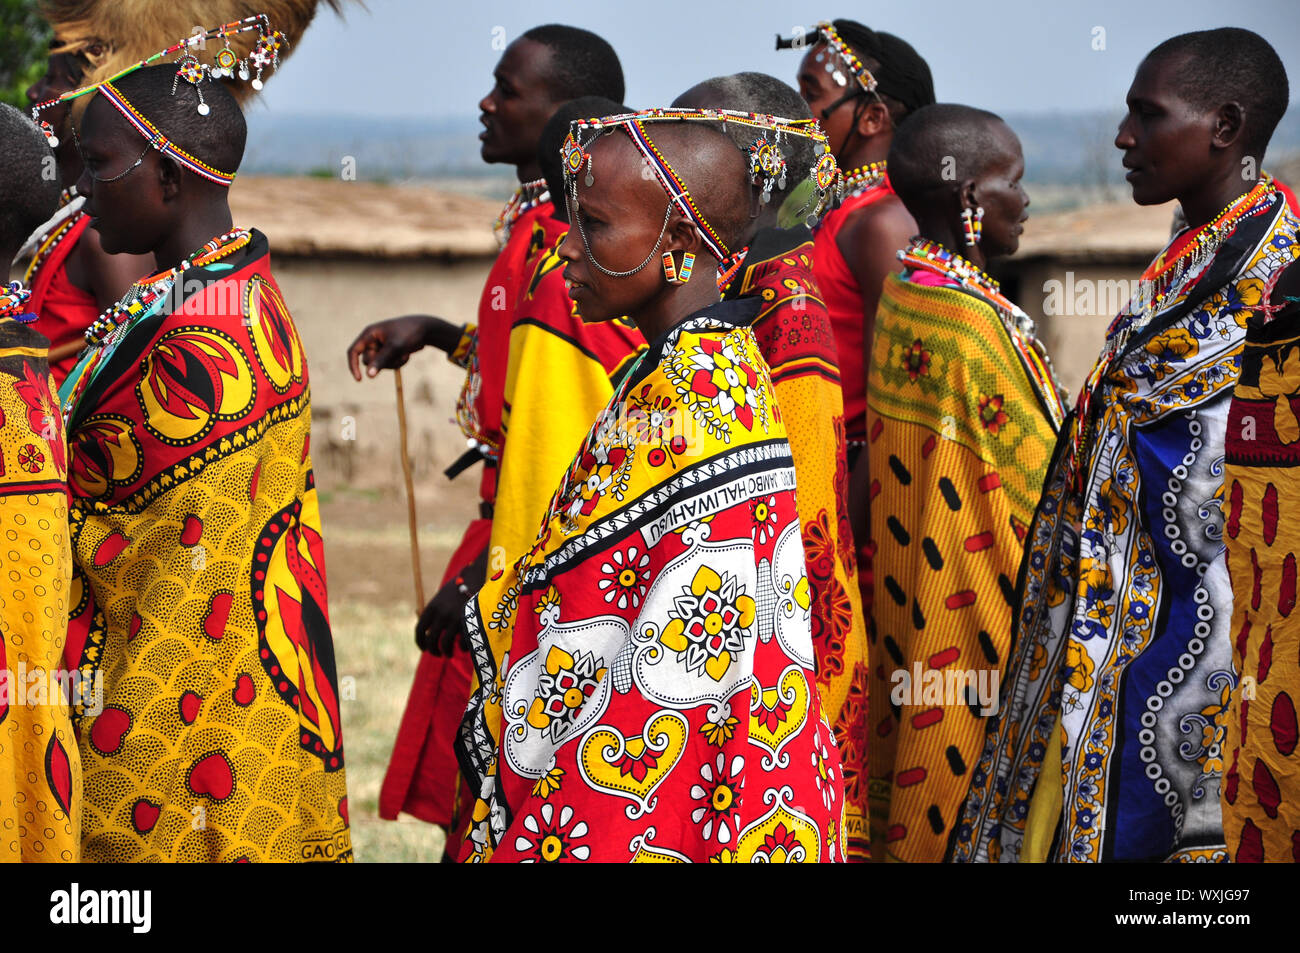 MASAI MARA NATIONAL RESERVE, KENYA- 19.August 2010. Group of Masai women and men  singing and doing a welcome dance. Stock Photo